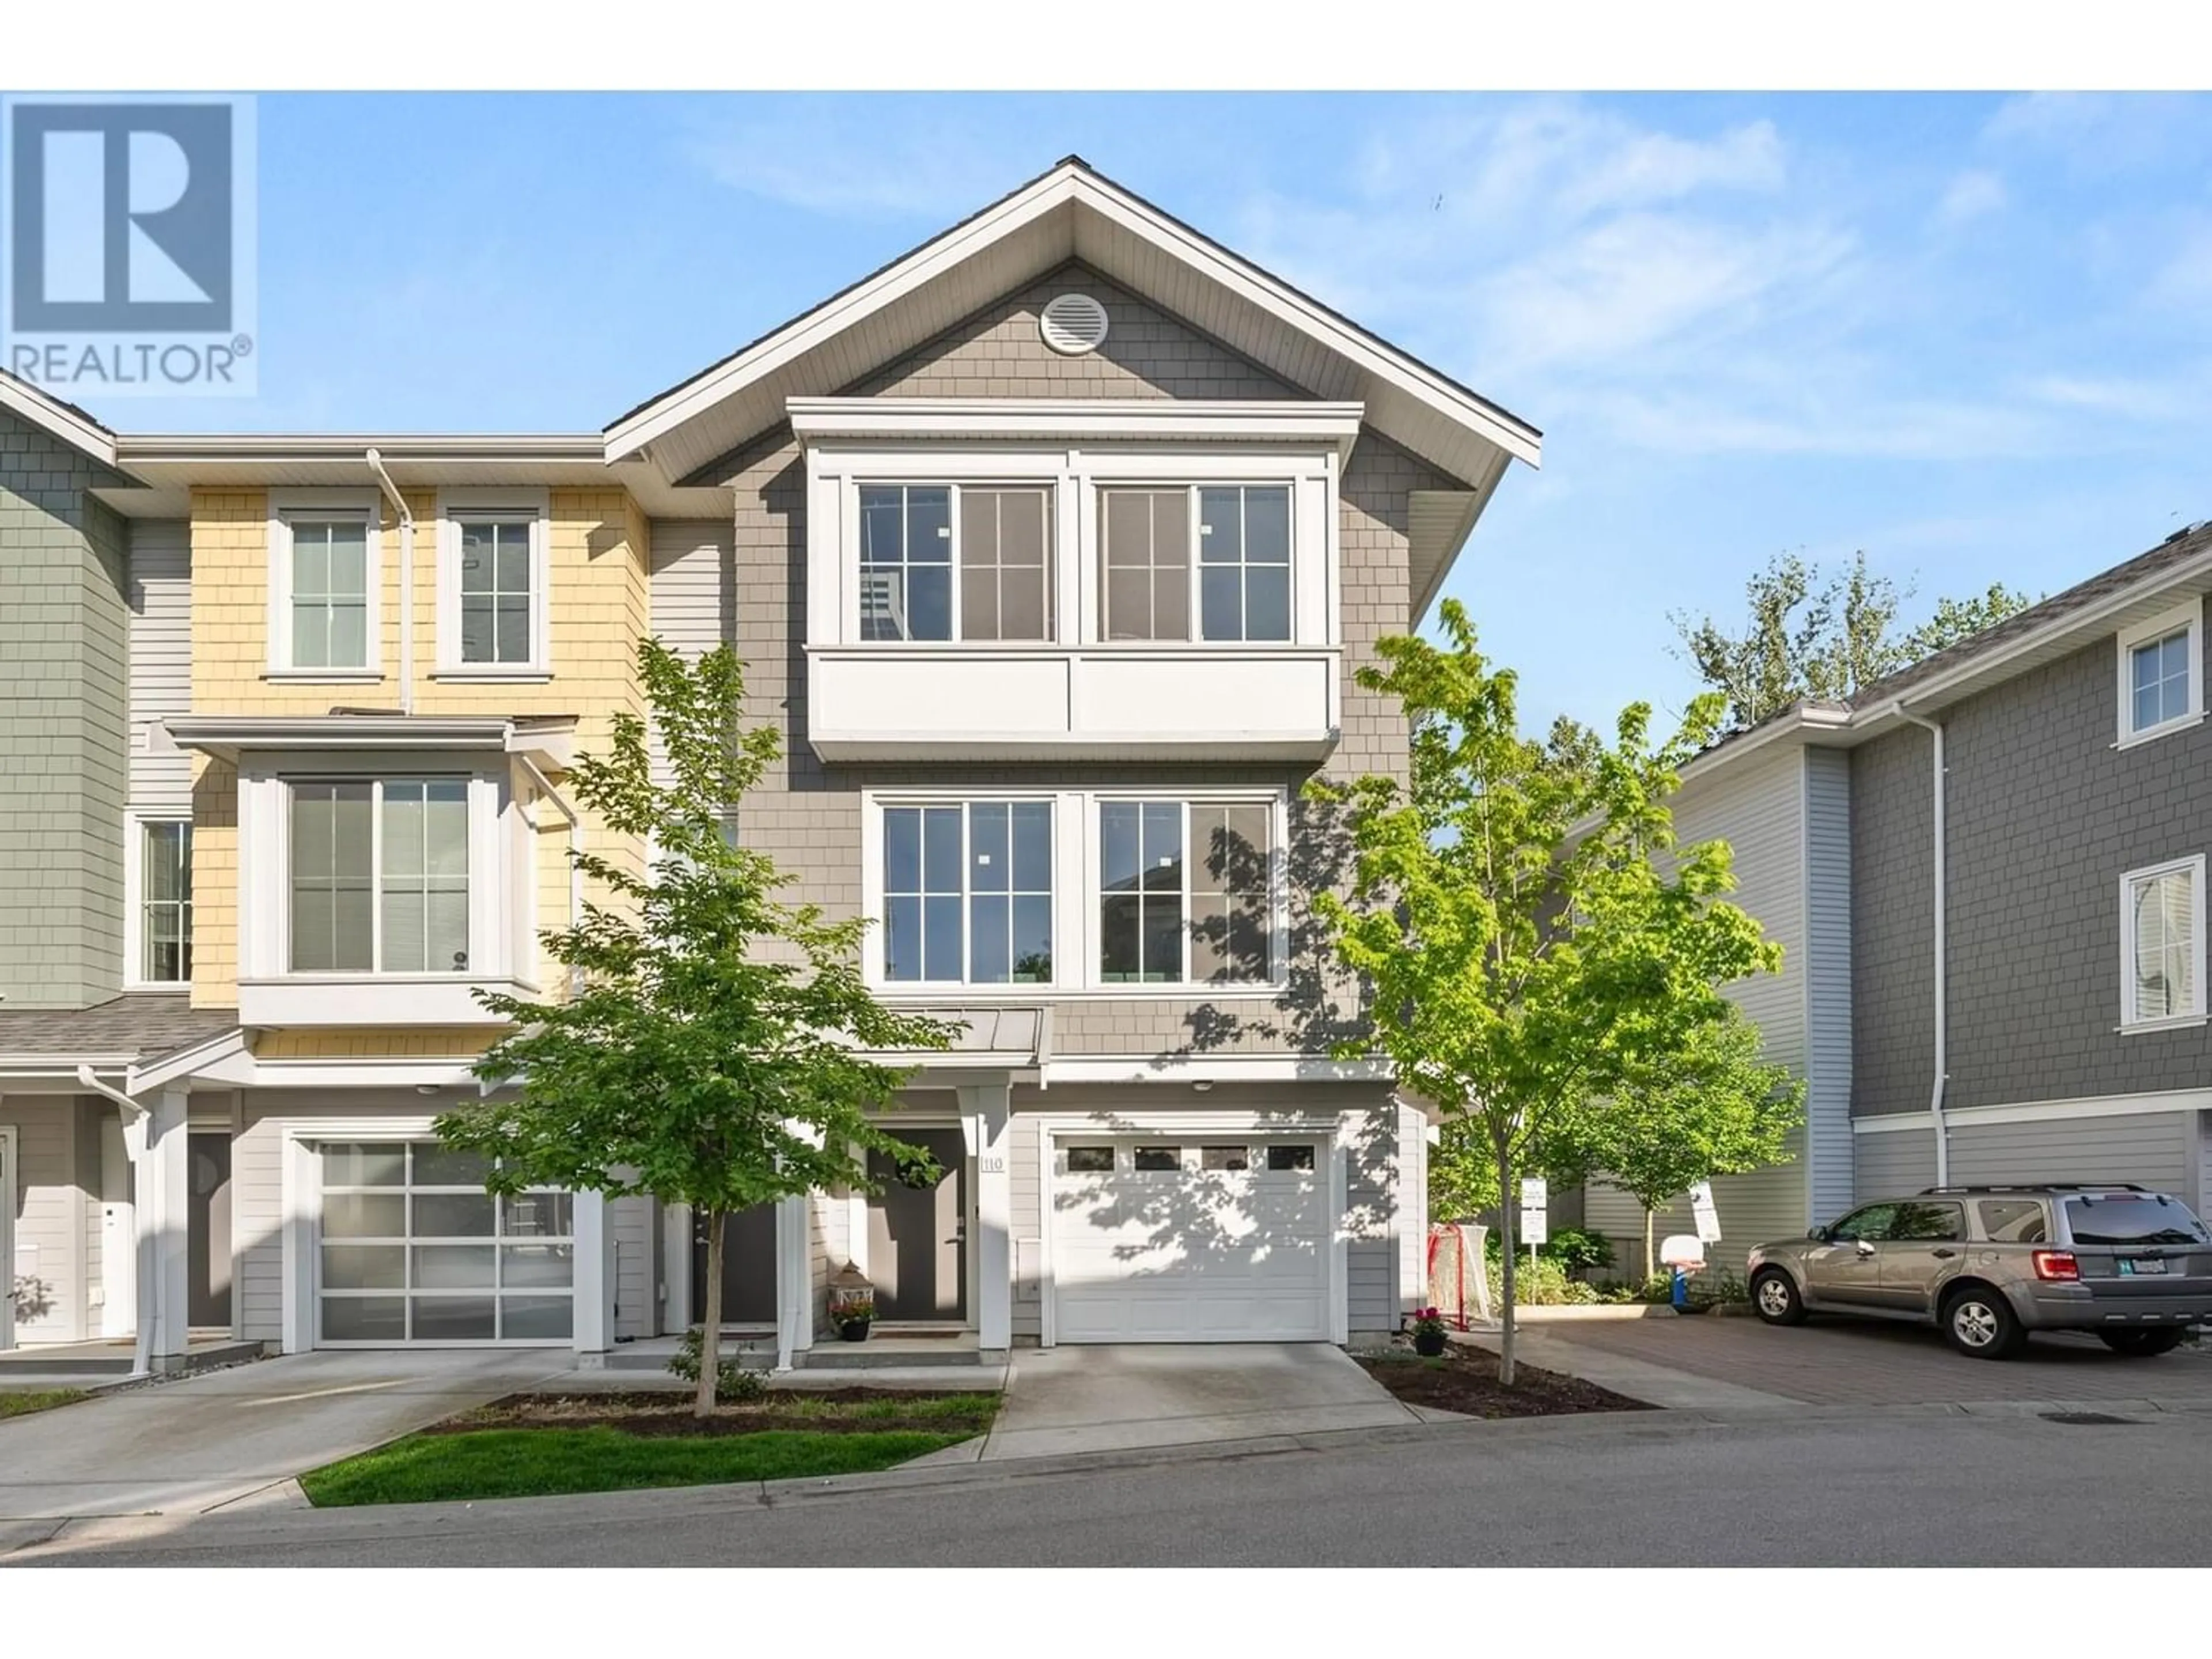 A pic from exterior of the house or condo for 110 5550 ADMIRAL WAY, Ladner British Columbia V4K0C4